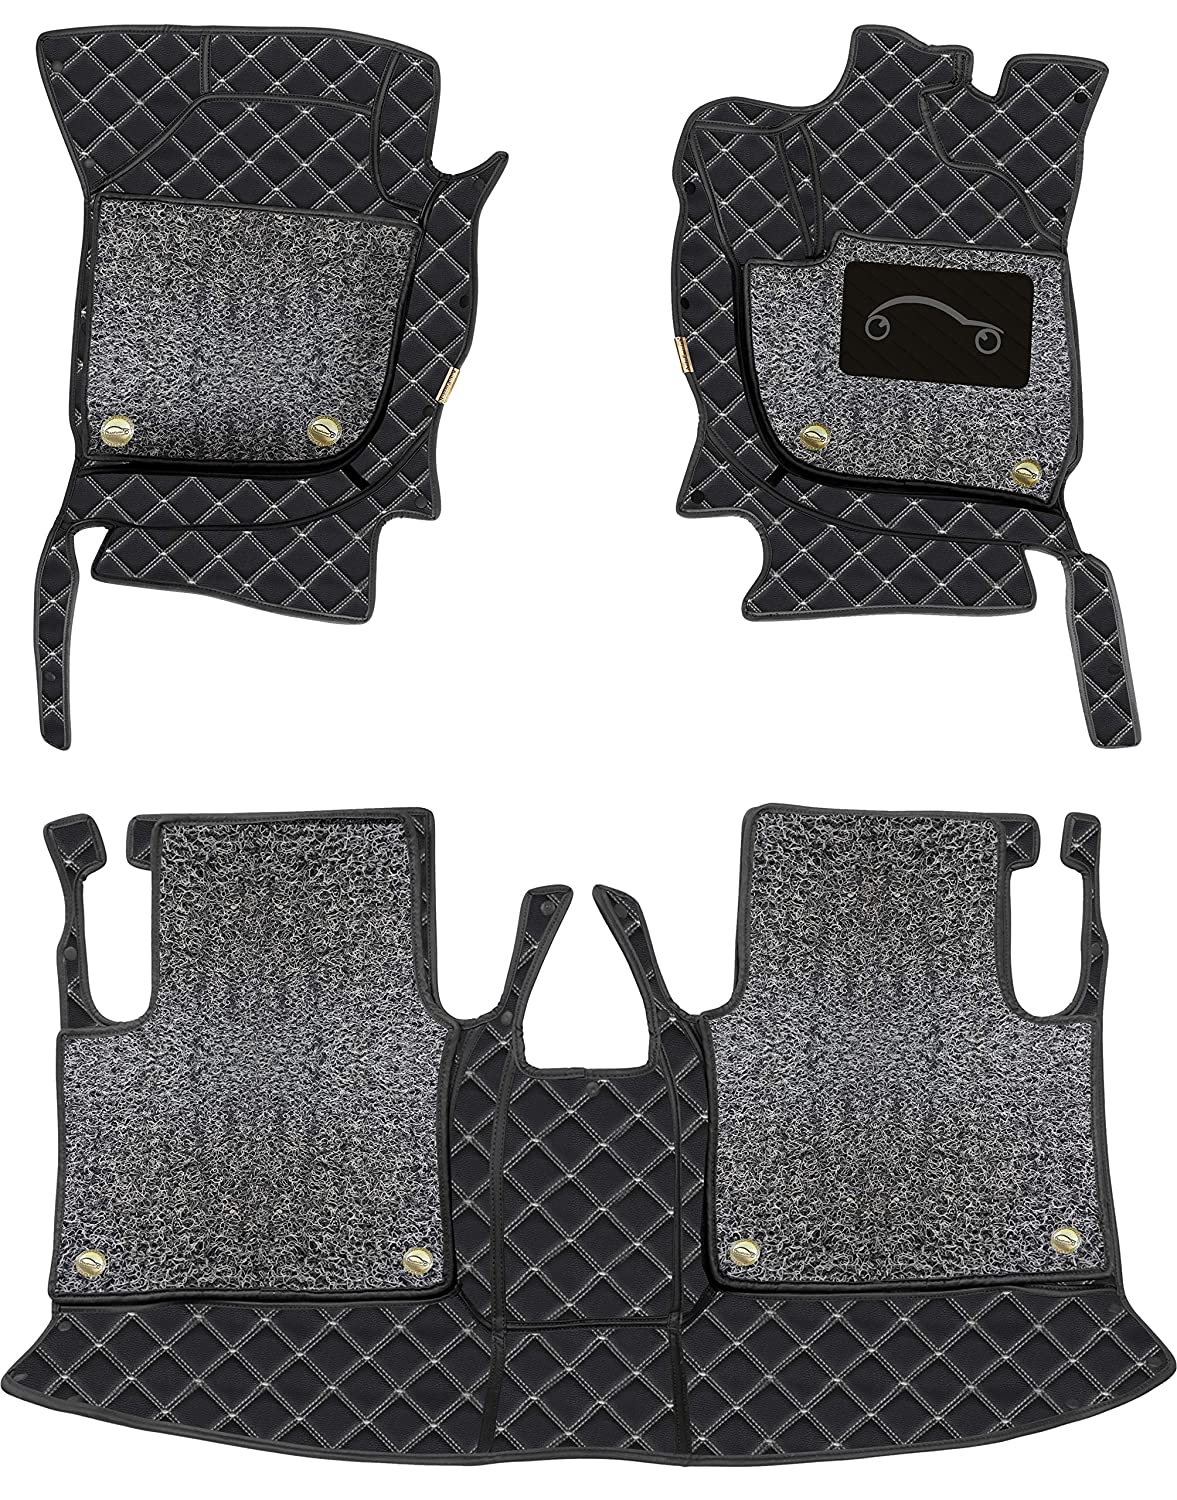 Mercedes GLA 7D Luxury Car Mat, All Weather Proof, Anti-Skid, 100% Waterproof & Odorless with Unique Diamond Fish Design (24mm Luxury PU Leather, 2 Rows)